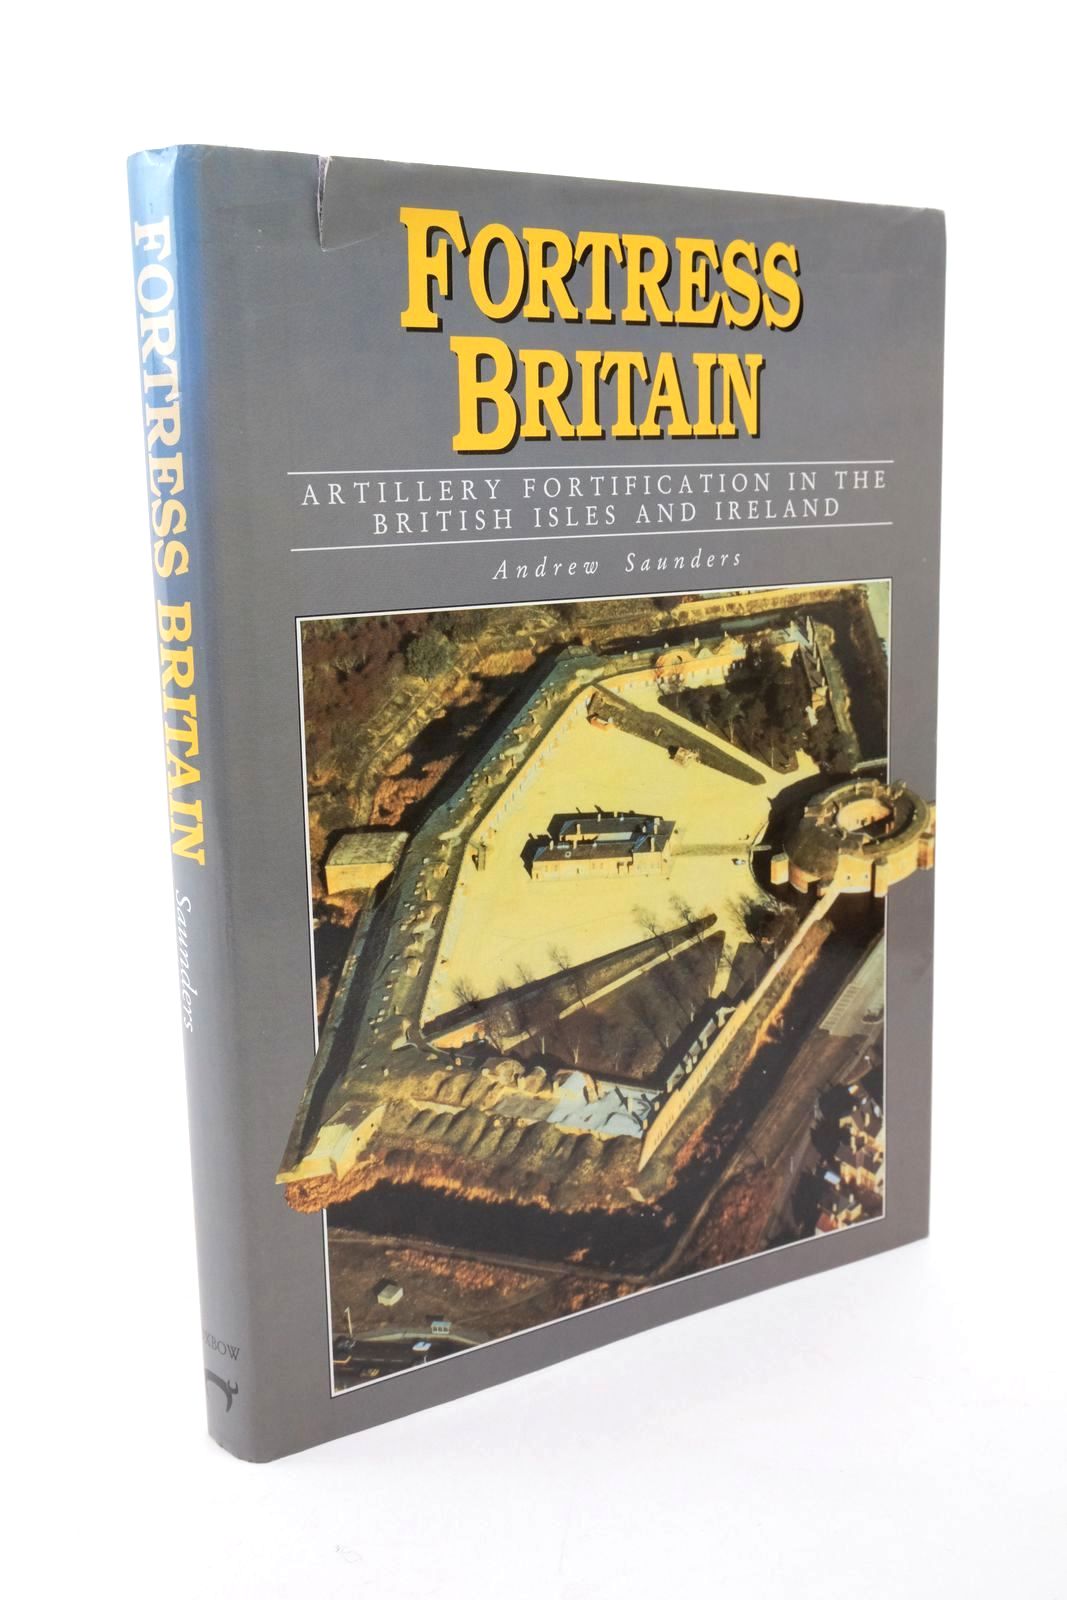 Fortress Britain: Artillery Fortification In The British Isles and Ireland